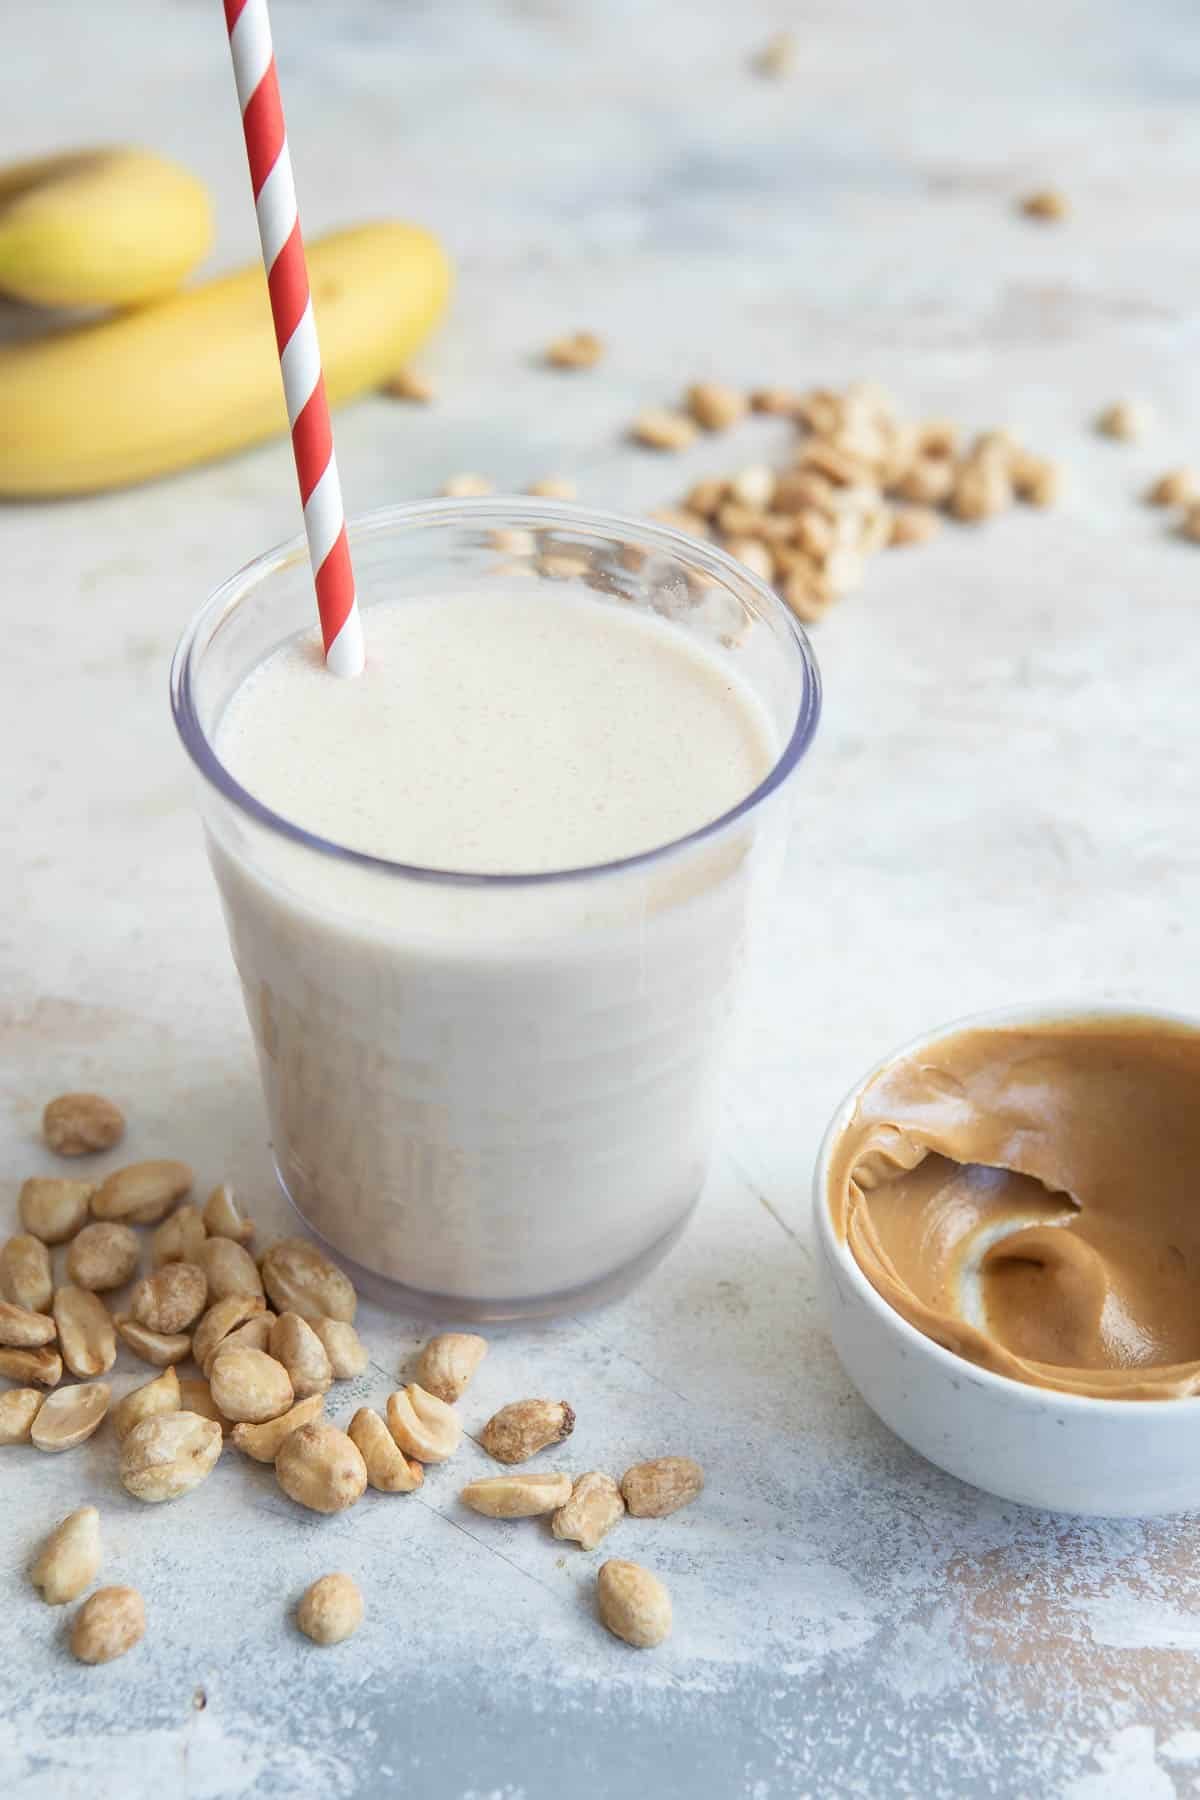 A glass of peanut butter smoothie.